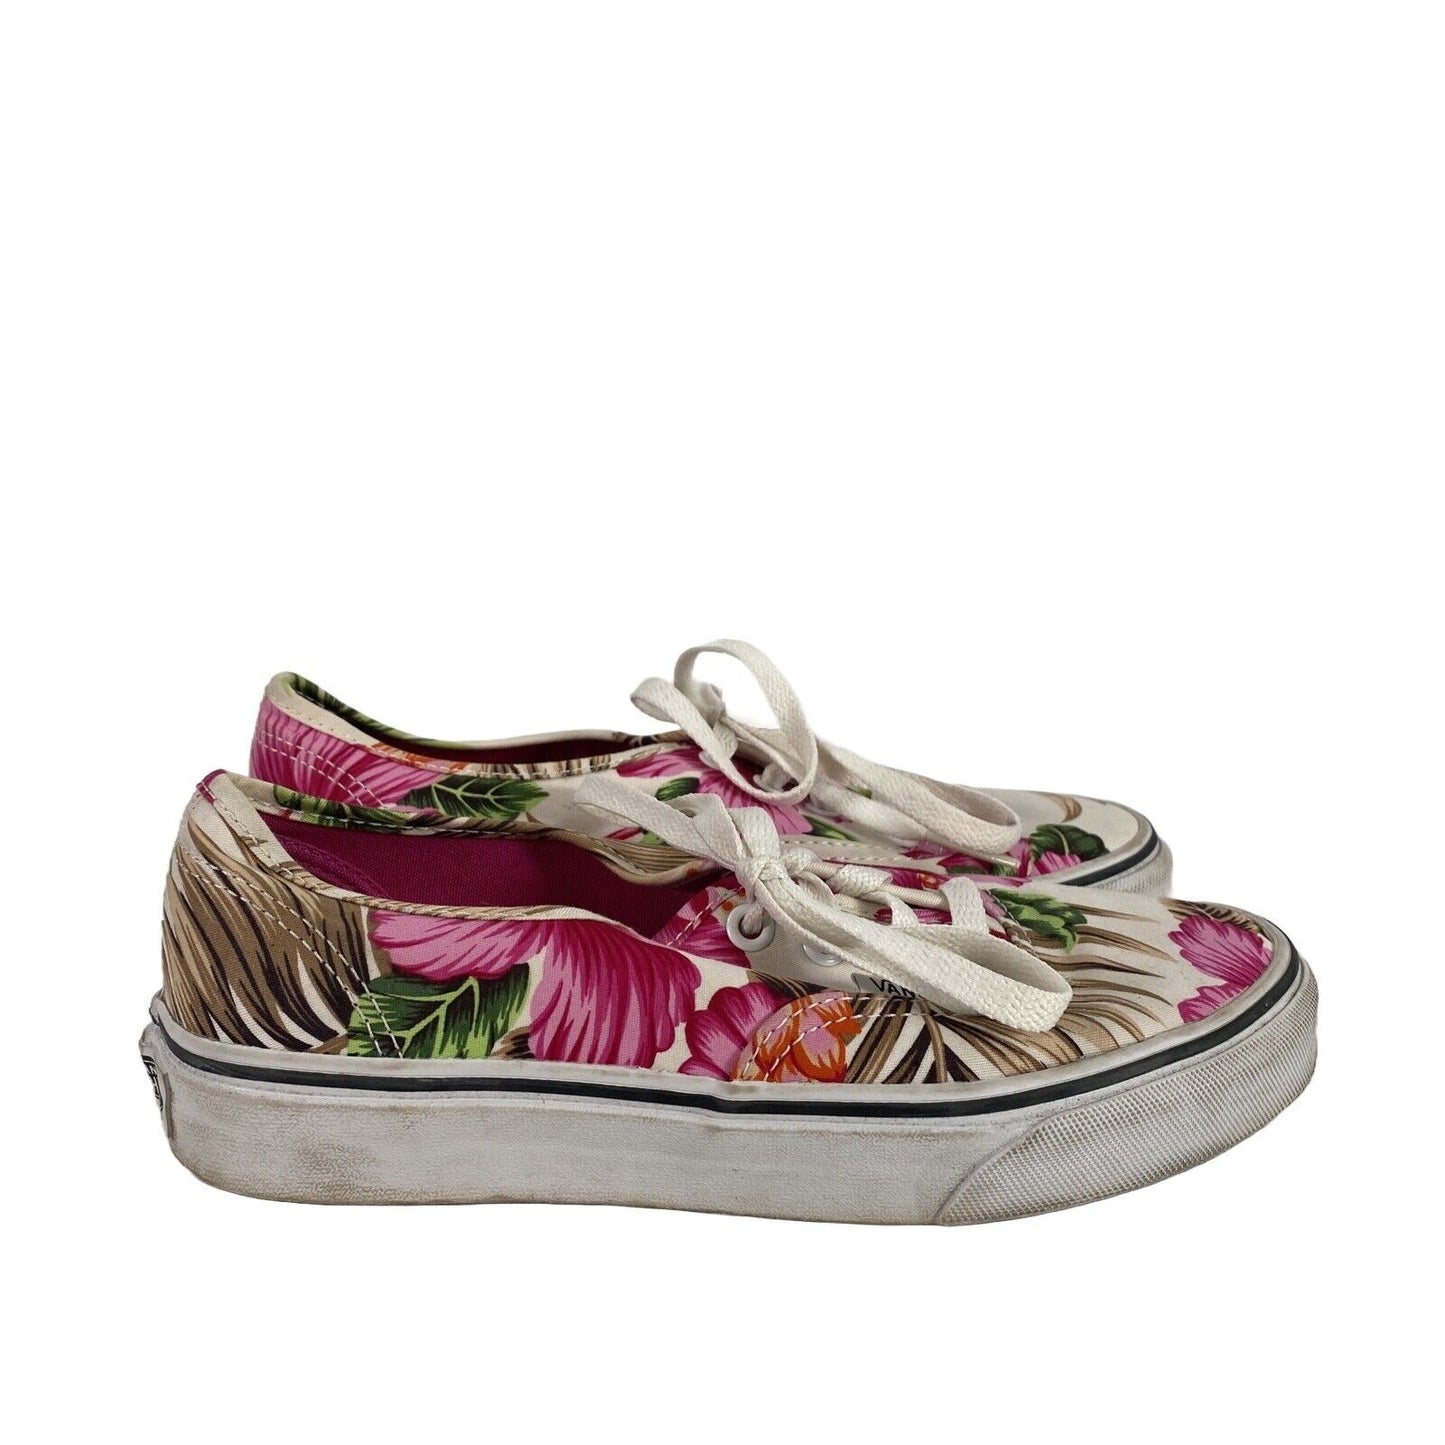 Vans Women's White & Pink Floral Lace Up Classic Sneakers - 6.5